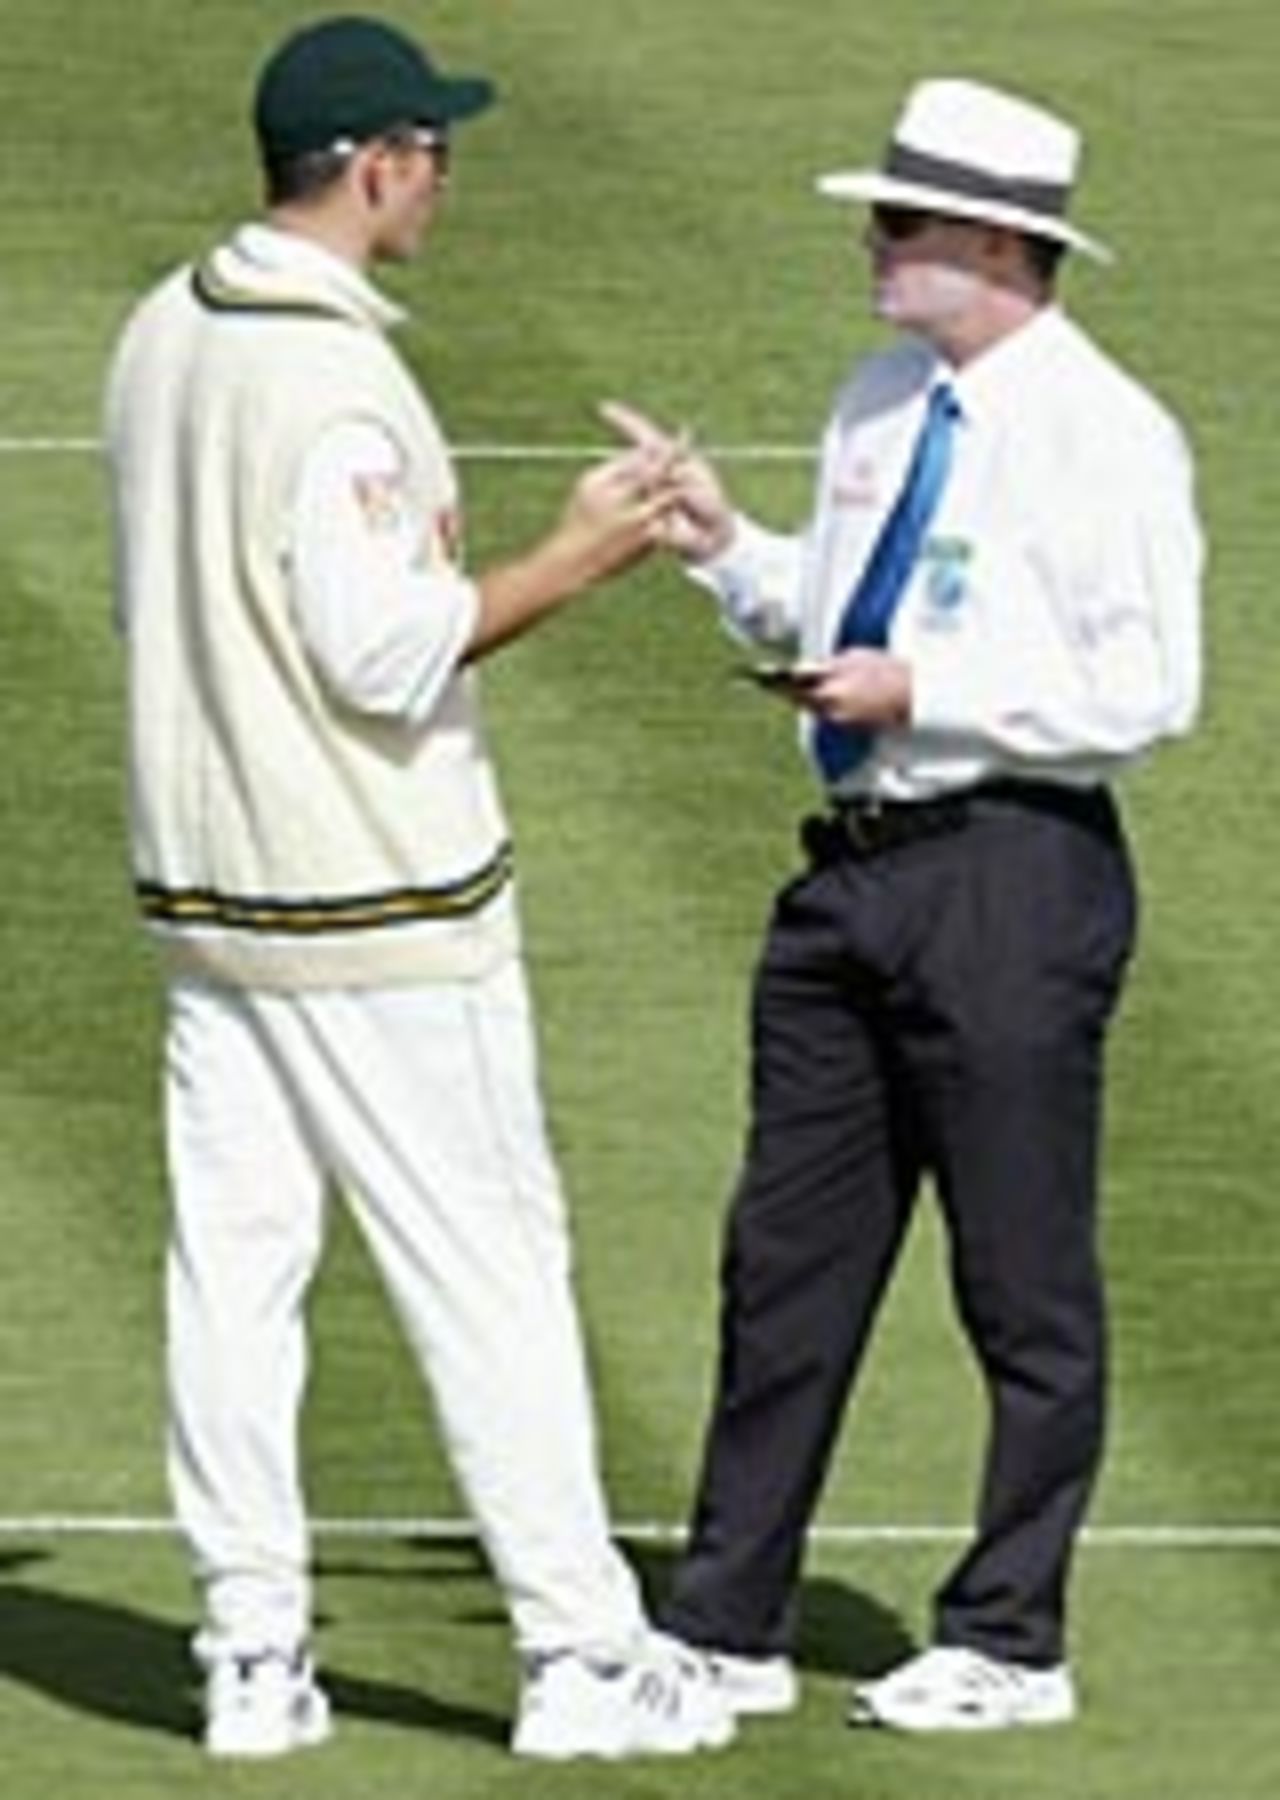 Graeme Smith and Russell Tiffin exchange views after Andre Nel had been warned for running down the wicket, New Zealand v South Africa, Hamilton, 1st Test, March 11, 2004